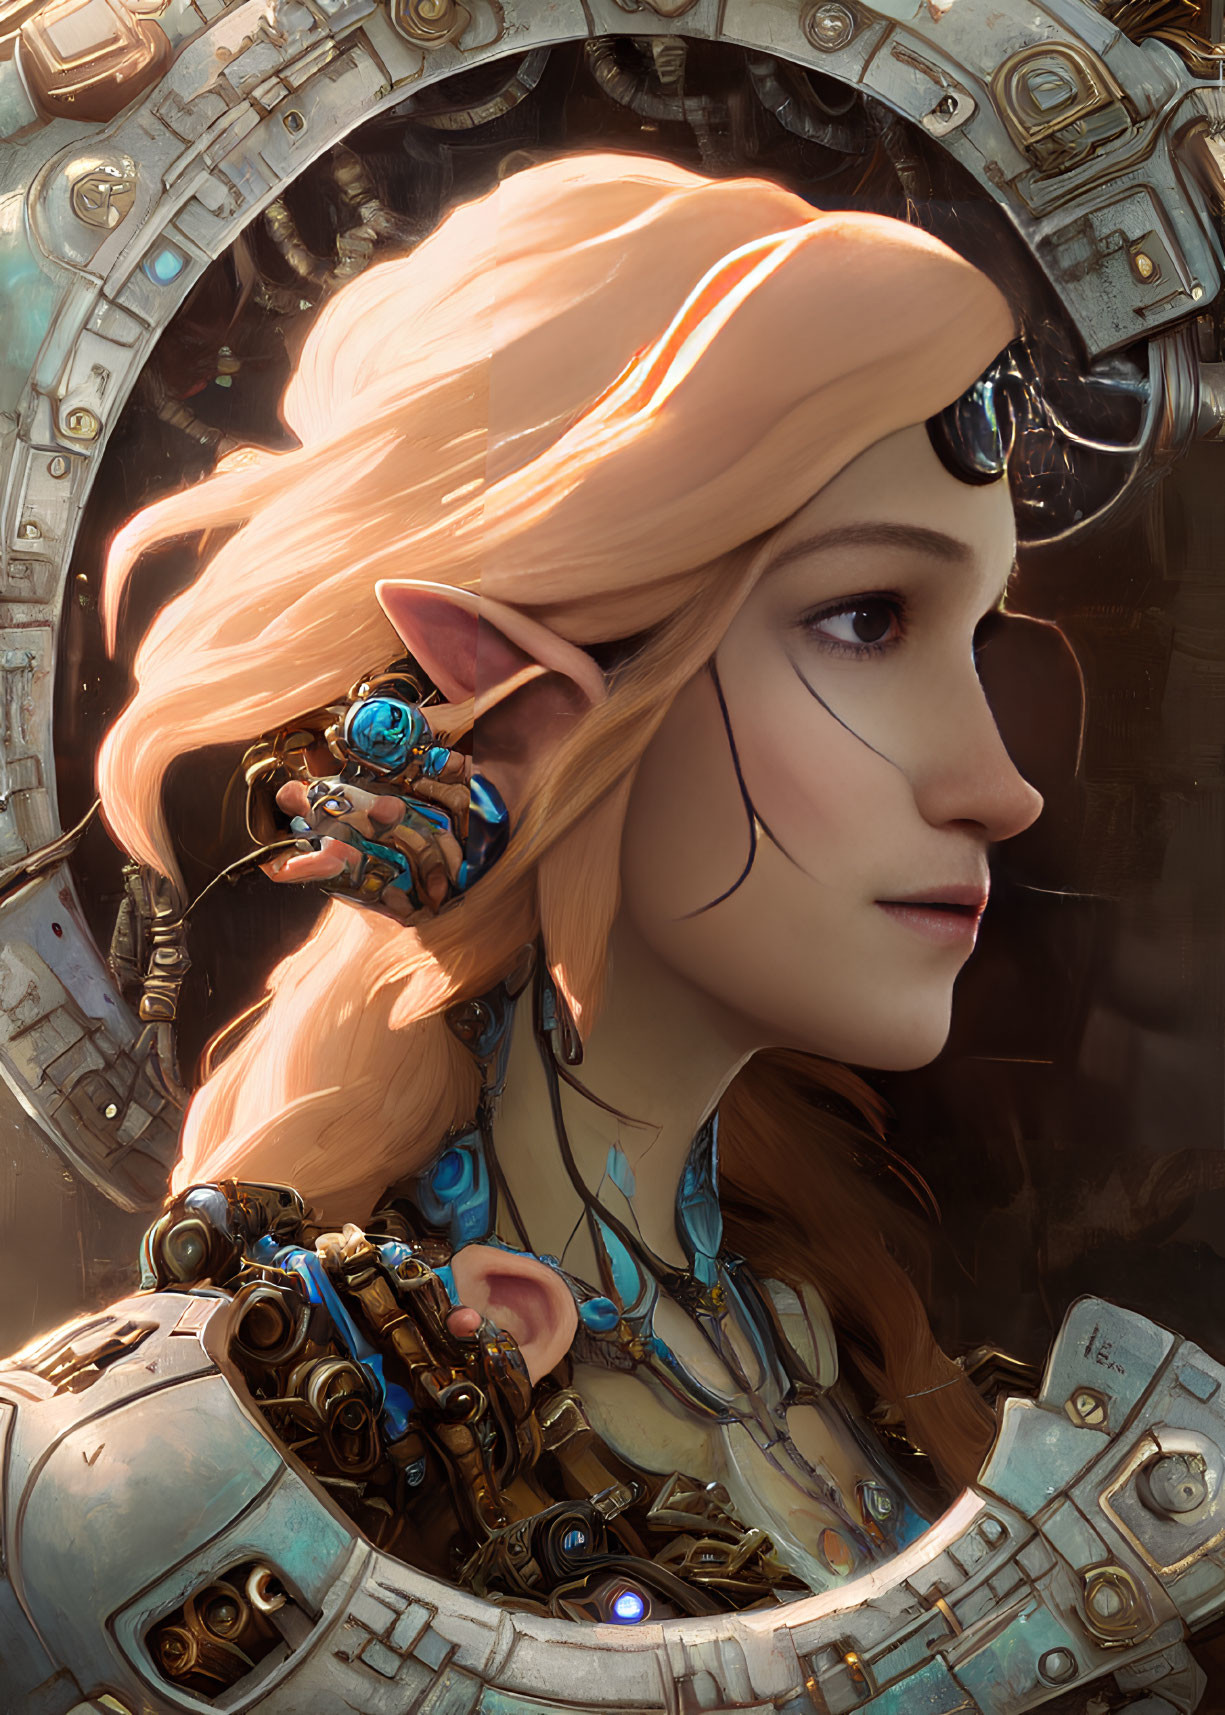 Female elf with peach hair emerges from circular portal with futuristic blue jewelry.